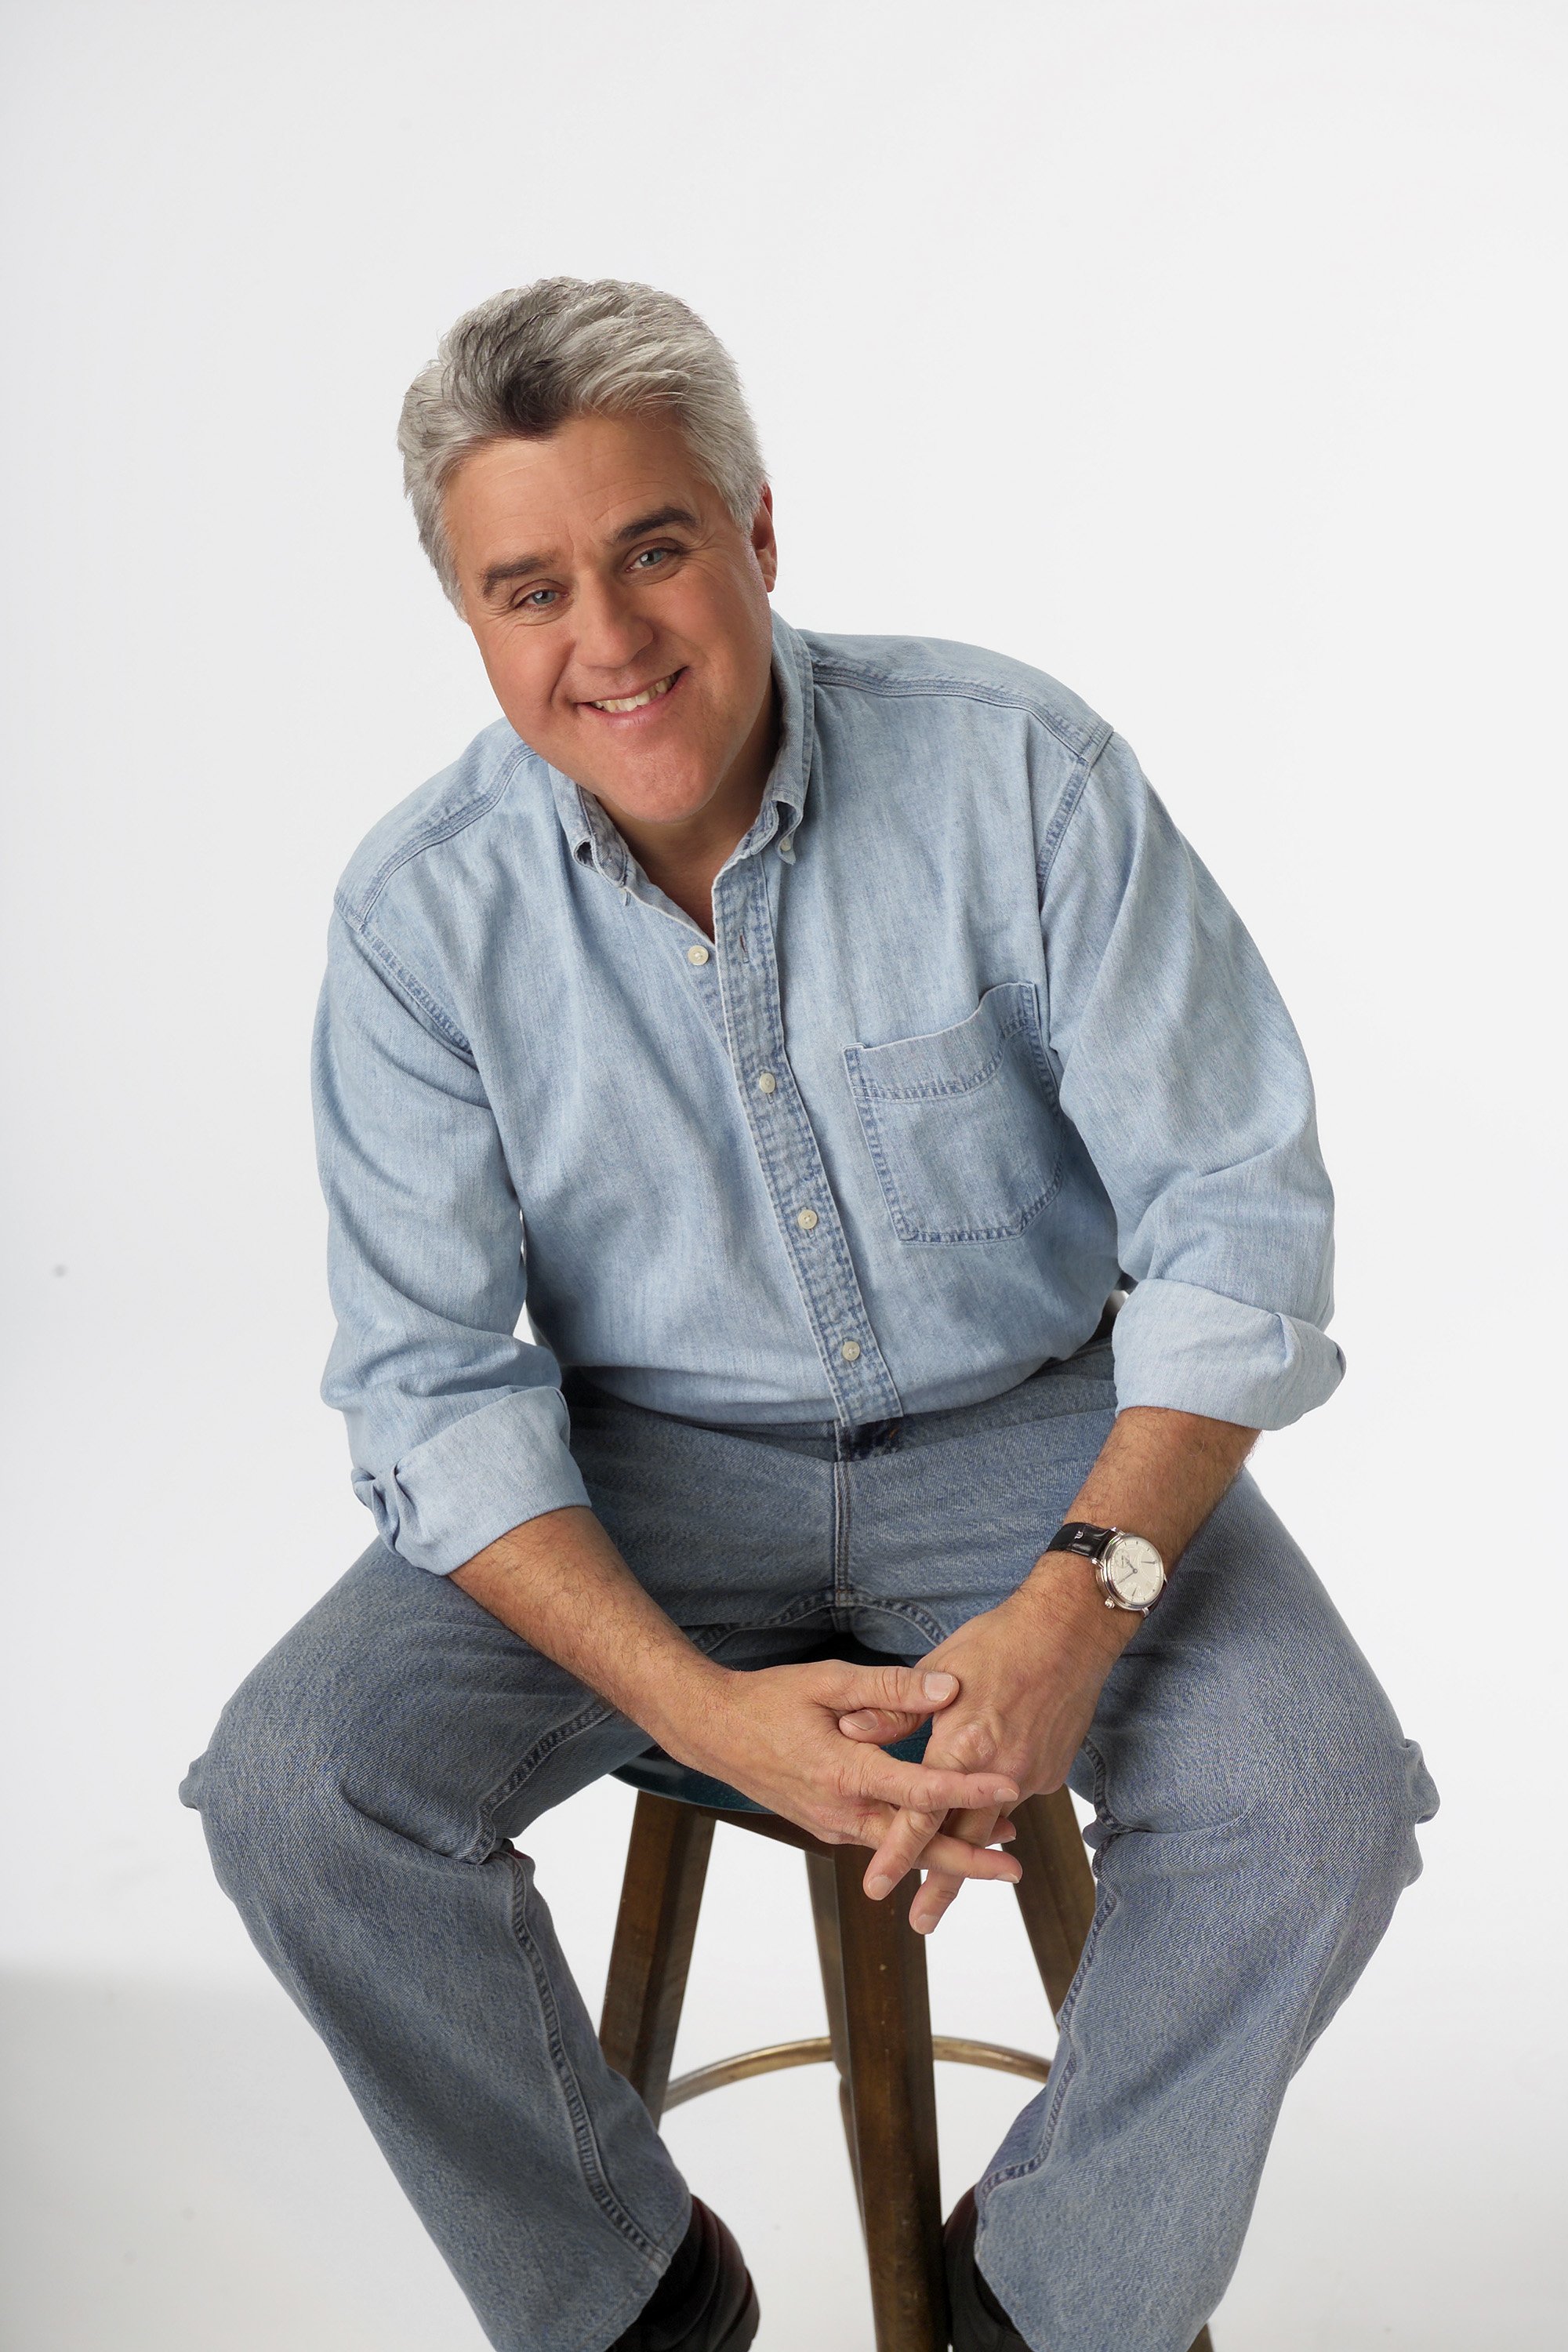 Jay Leno in 2004. | Source: Getty Images